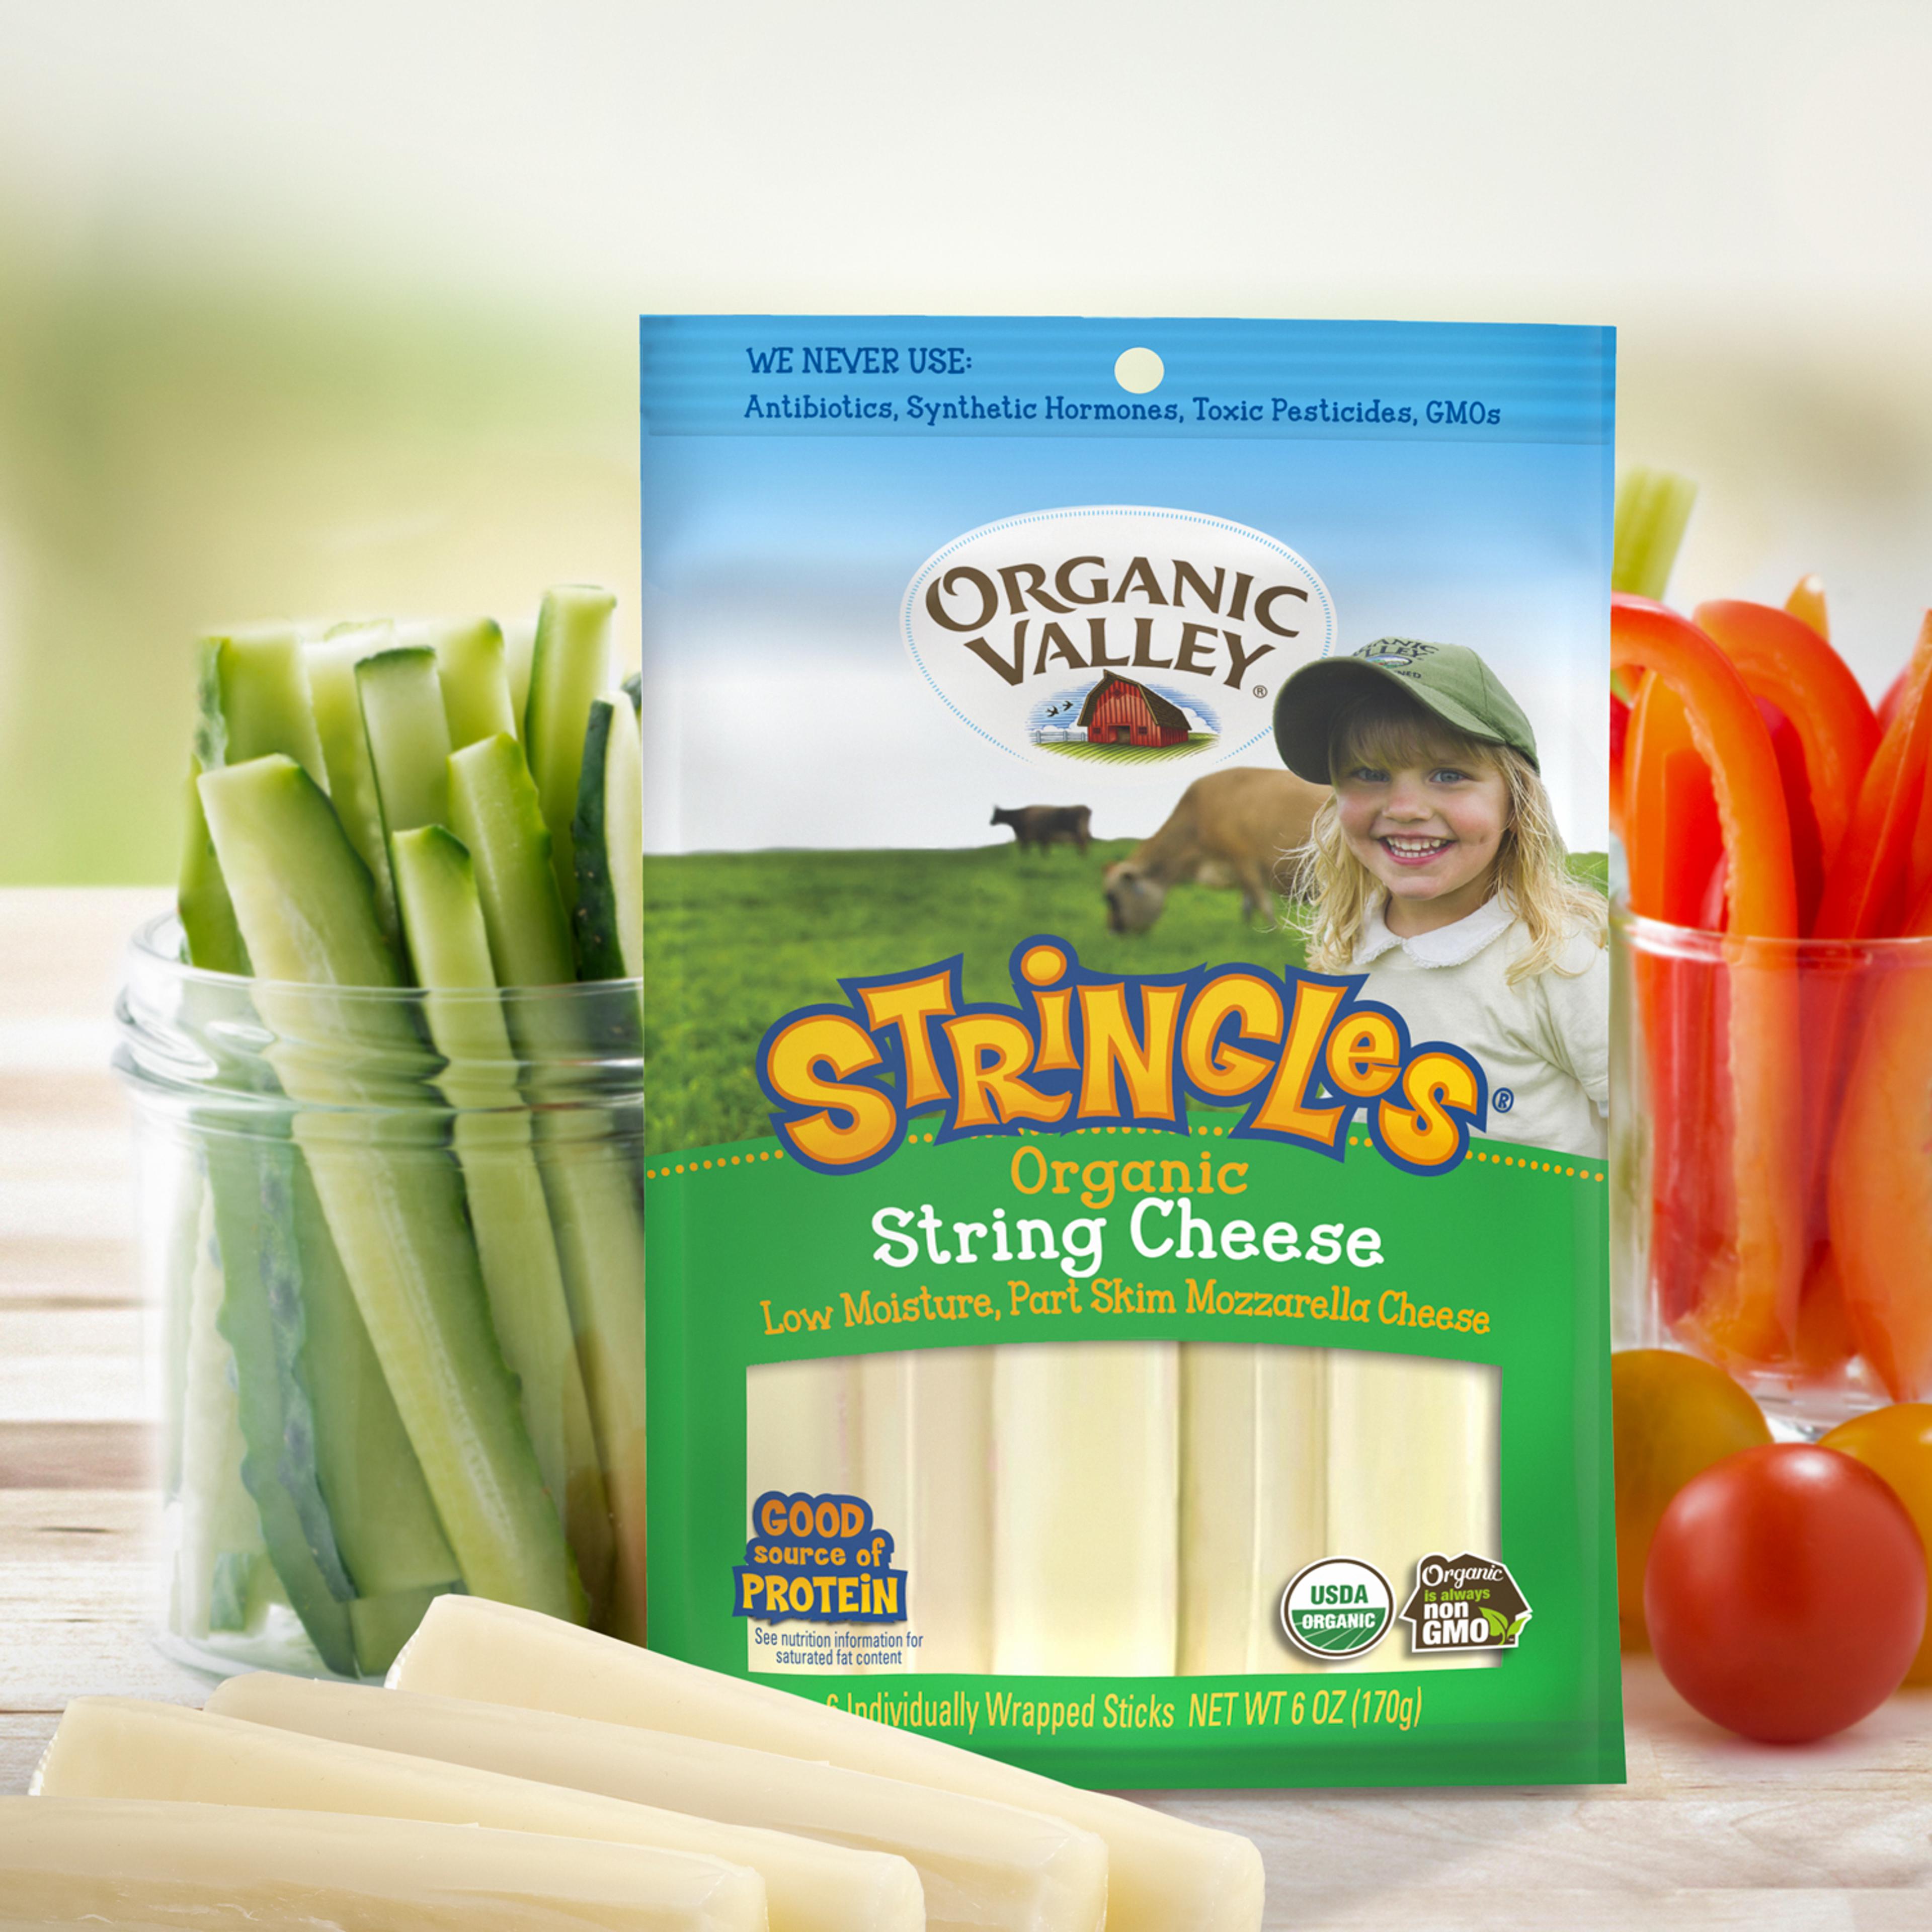 Stringles String Cheese and vegetables.